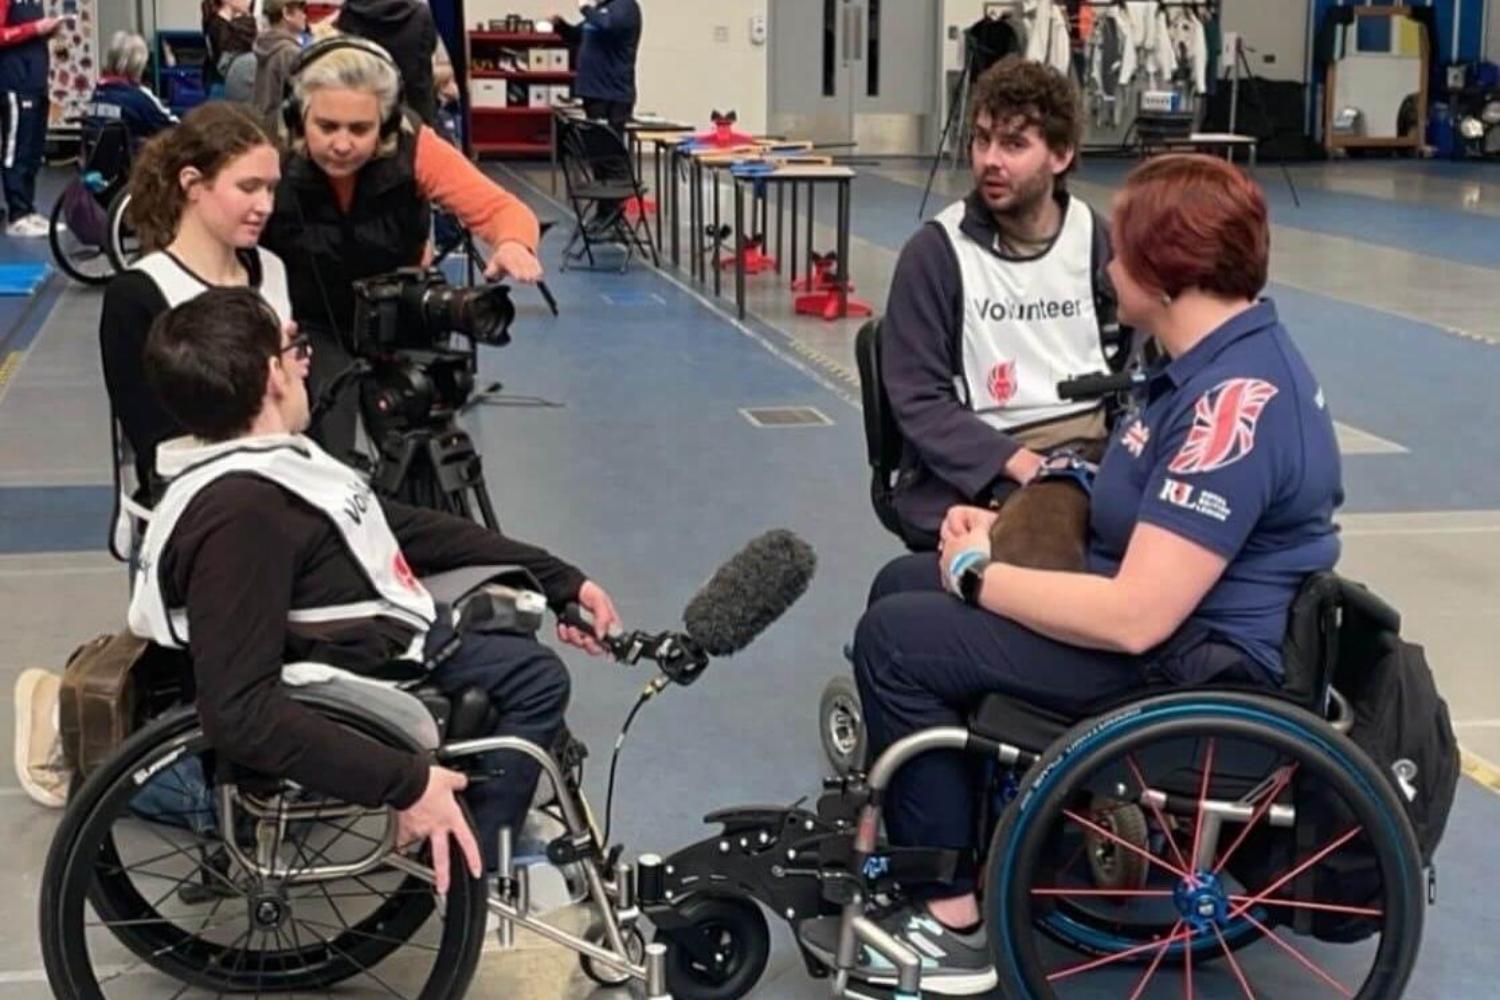 Students interview two para athletes